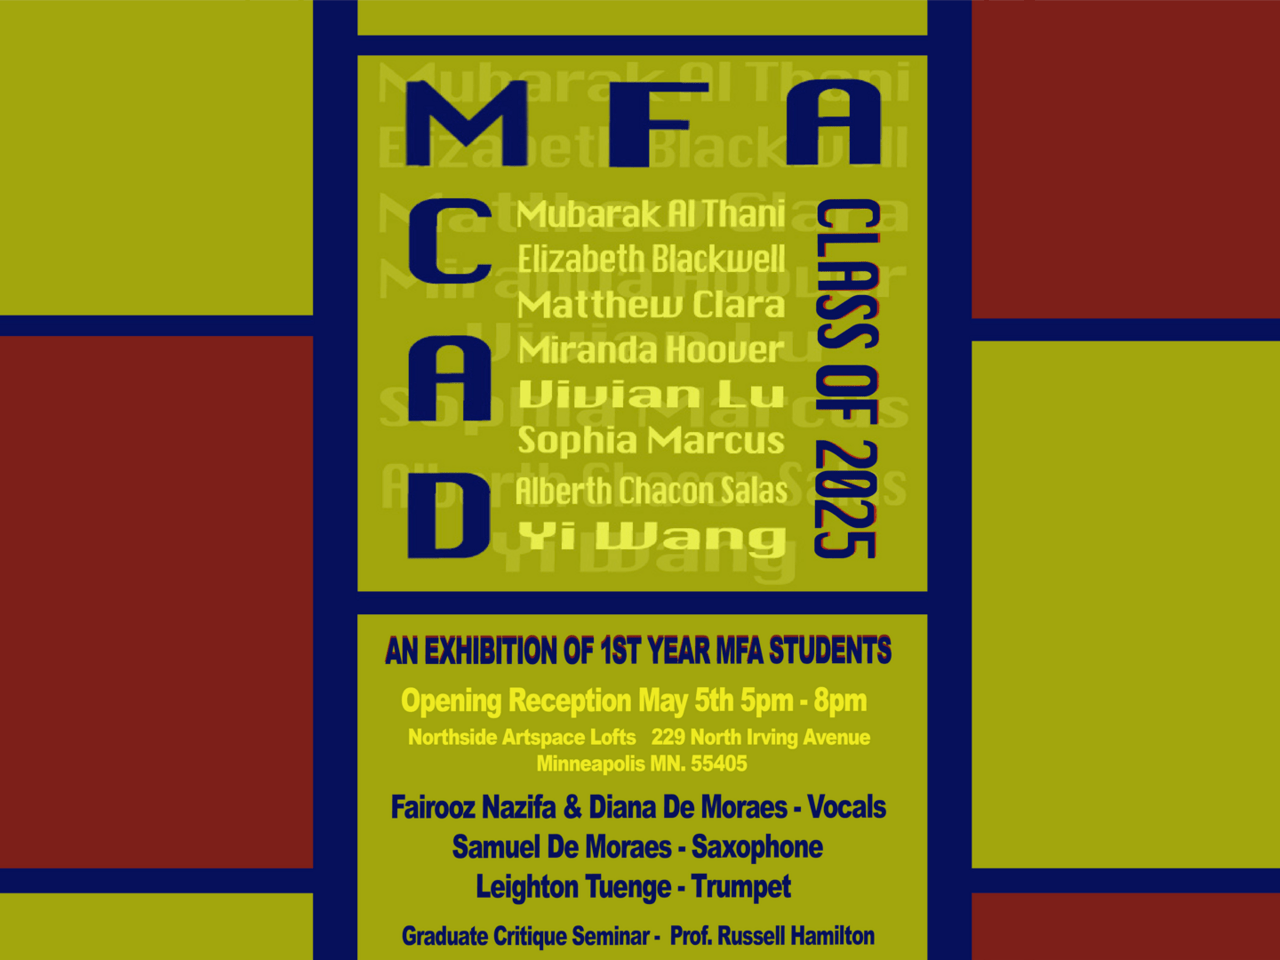 An image of a poster promoting the MCAD MFA class of 2025 exhibition.